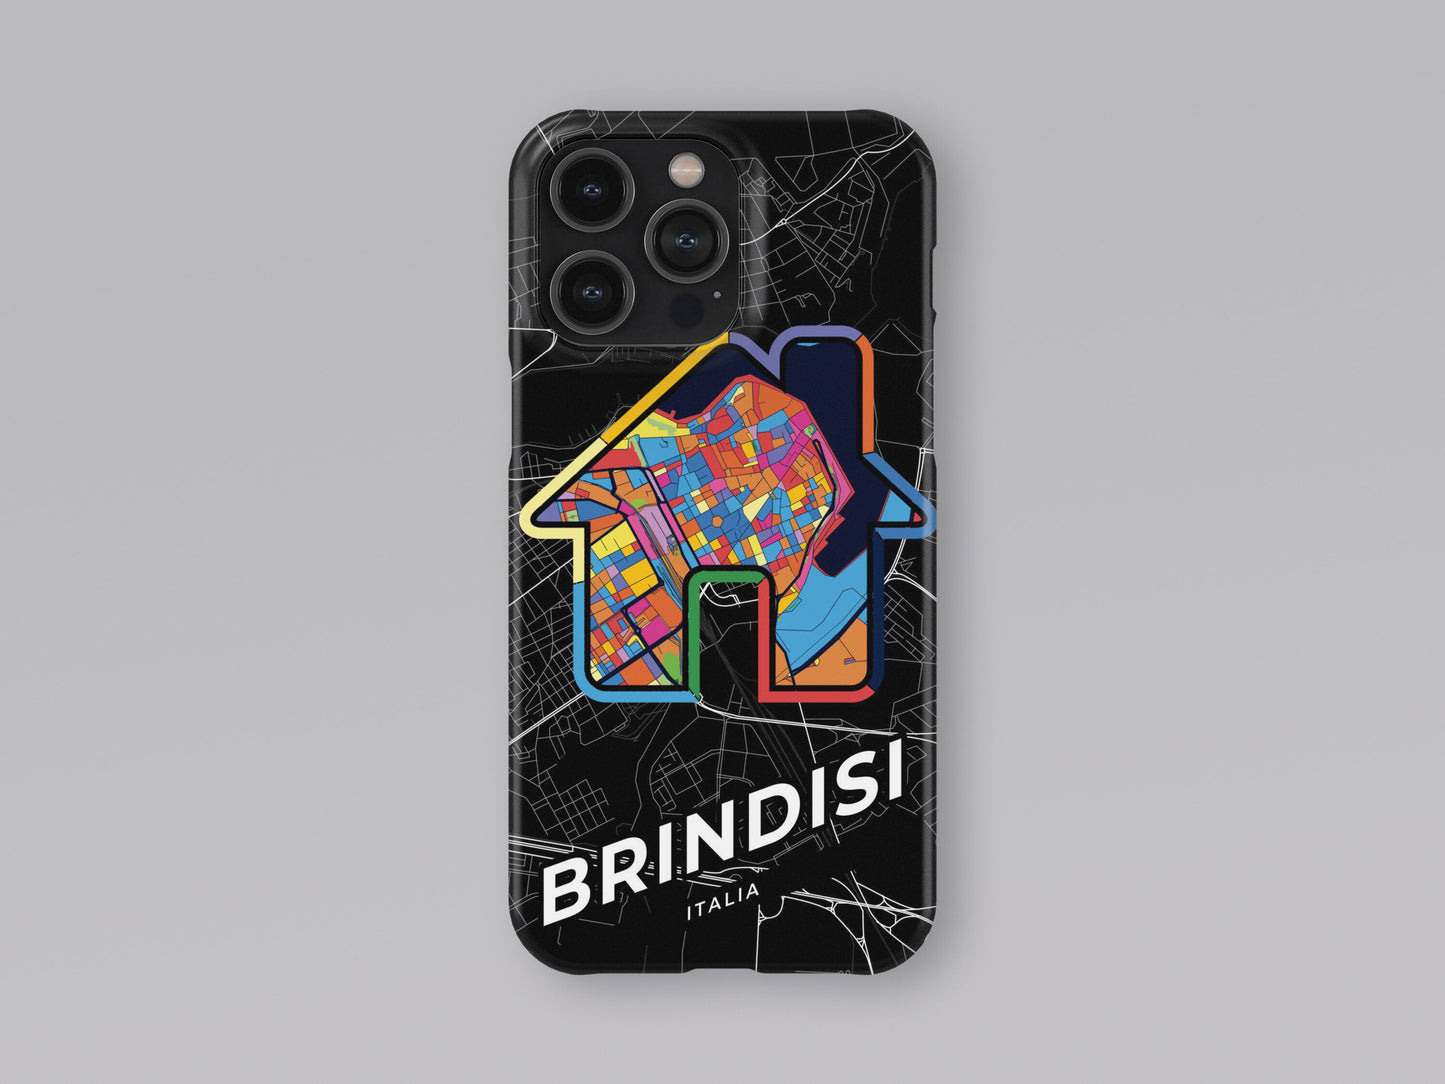 Brindisi Italy slim phone case with colorful icon. Birthday, wedding or housewarming gift. Couple match cases. 3